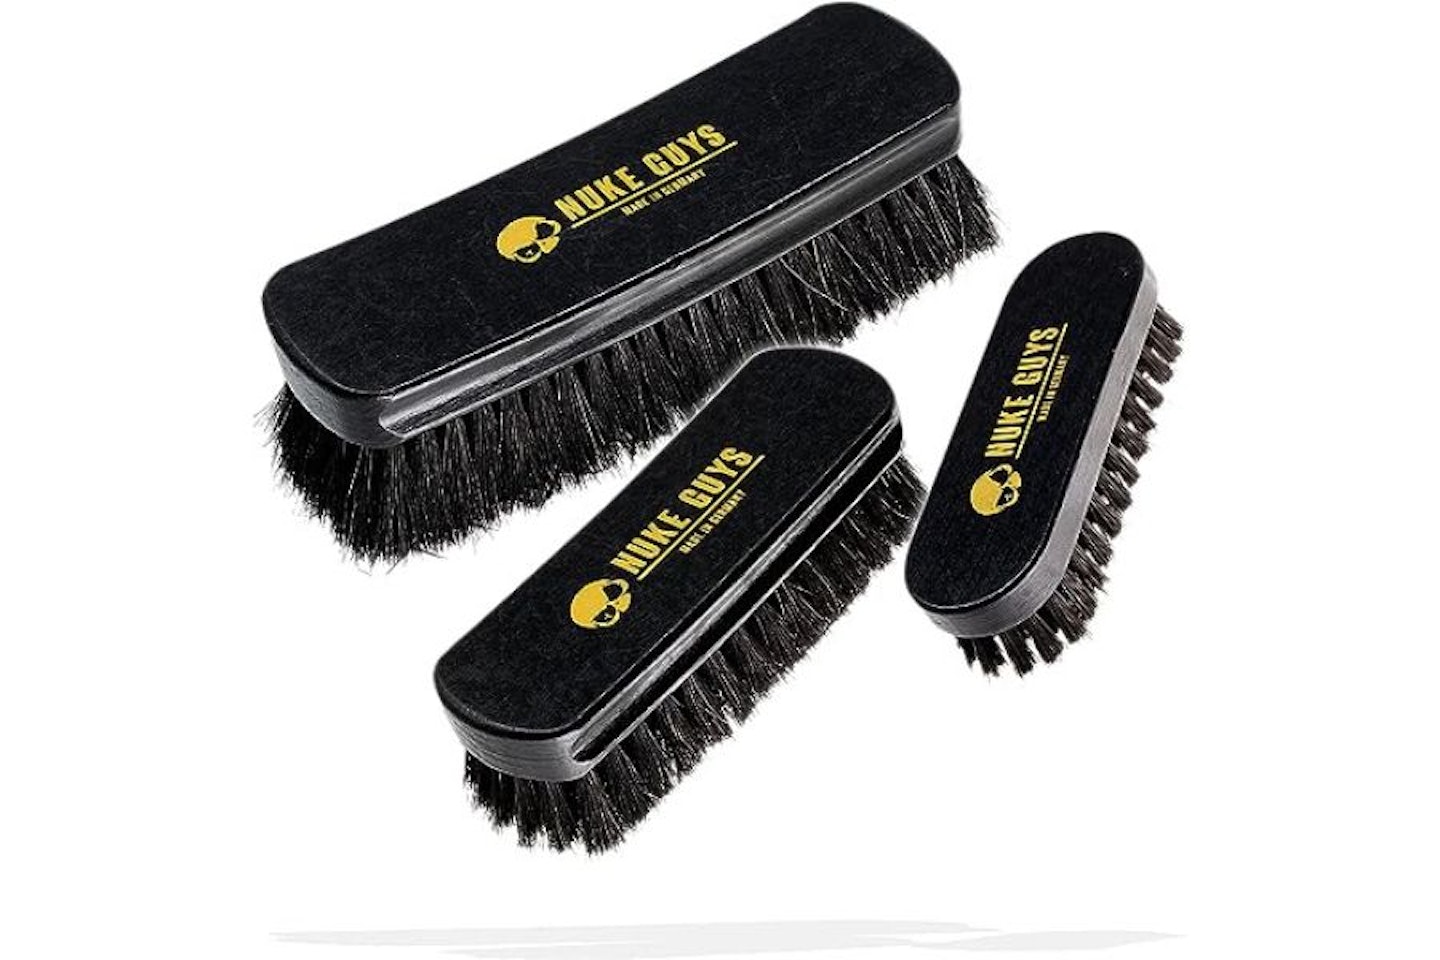 The Best Leather Cleaning Brush - Comparing For Results and Efficiency 